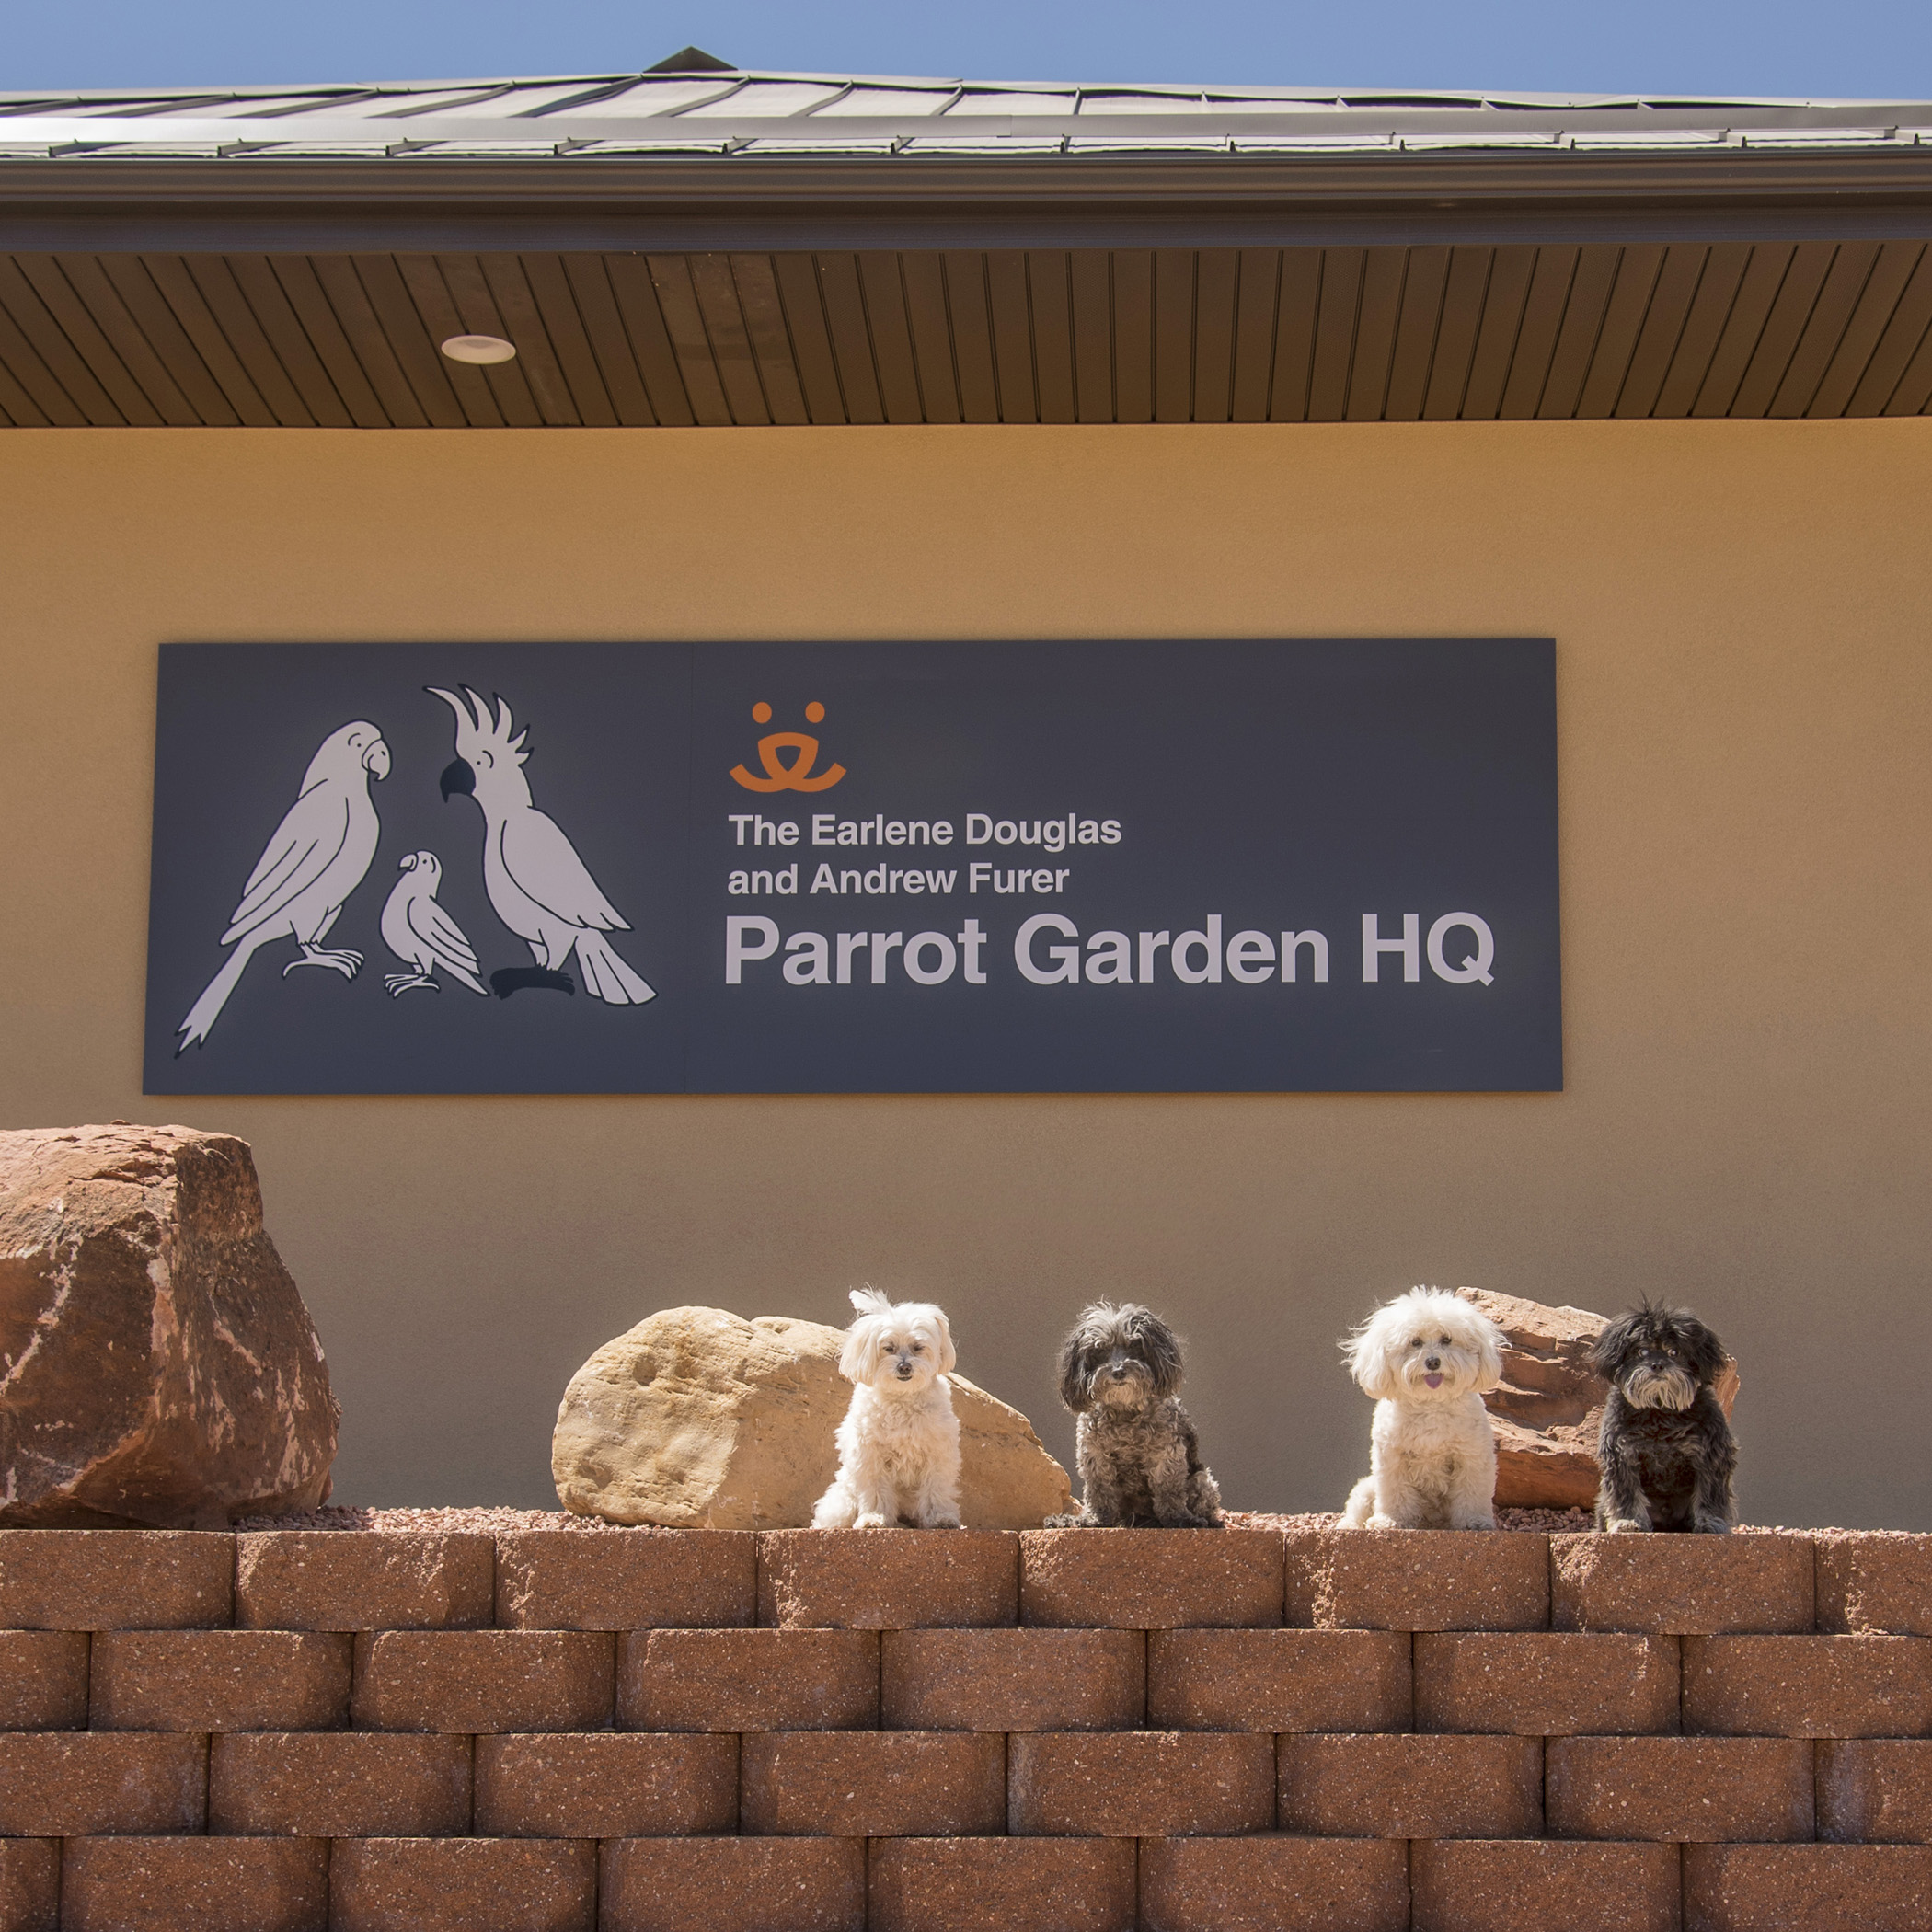  Up next for Mommy &amp; Daddy was Parrot Garden. It reminded Mommy of their trip to Australia, being surrounded by so many beautiful Feathered Friends! Birds lose their homes just like other pets. In fact, because parrots live such a long time, they